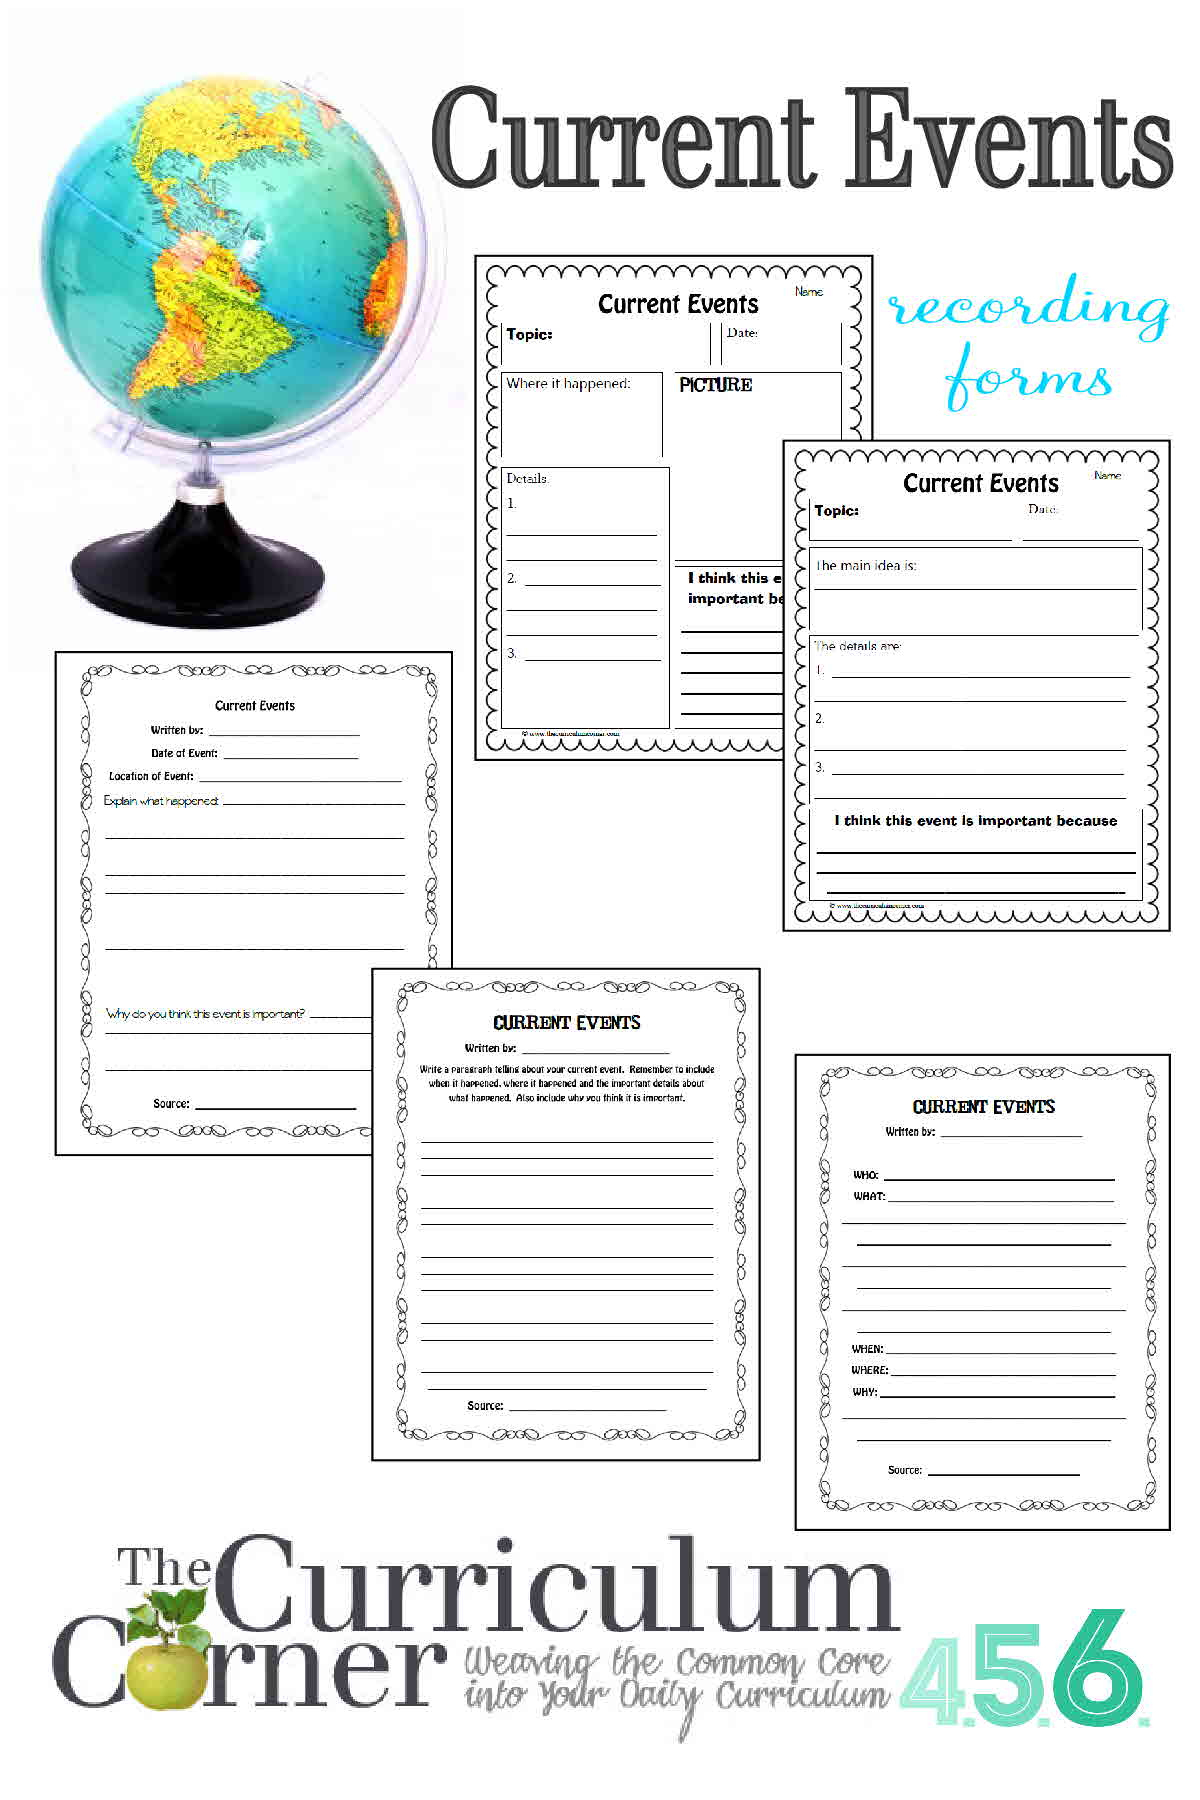 Current Events - The Curriculum Corner 4-5-6 | Current Events Printable Worksheet